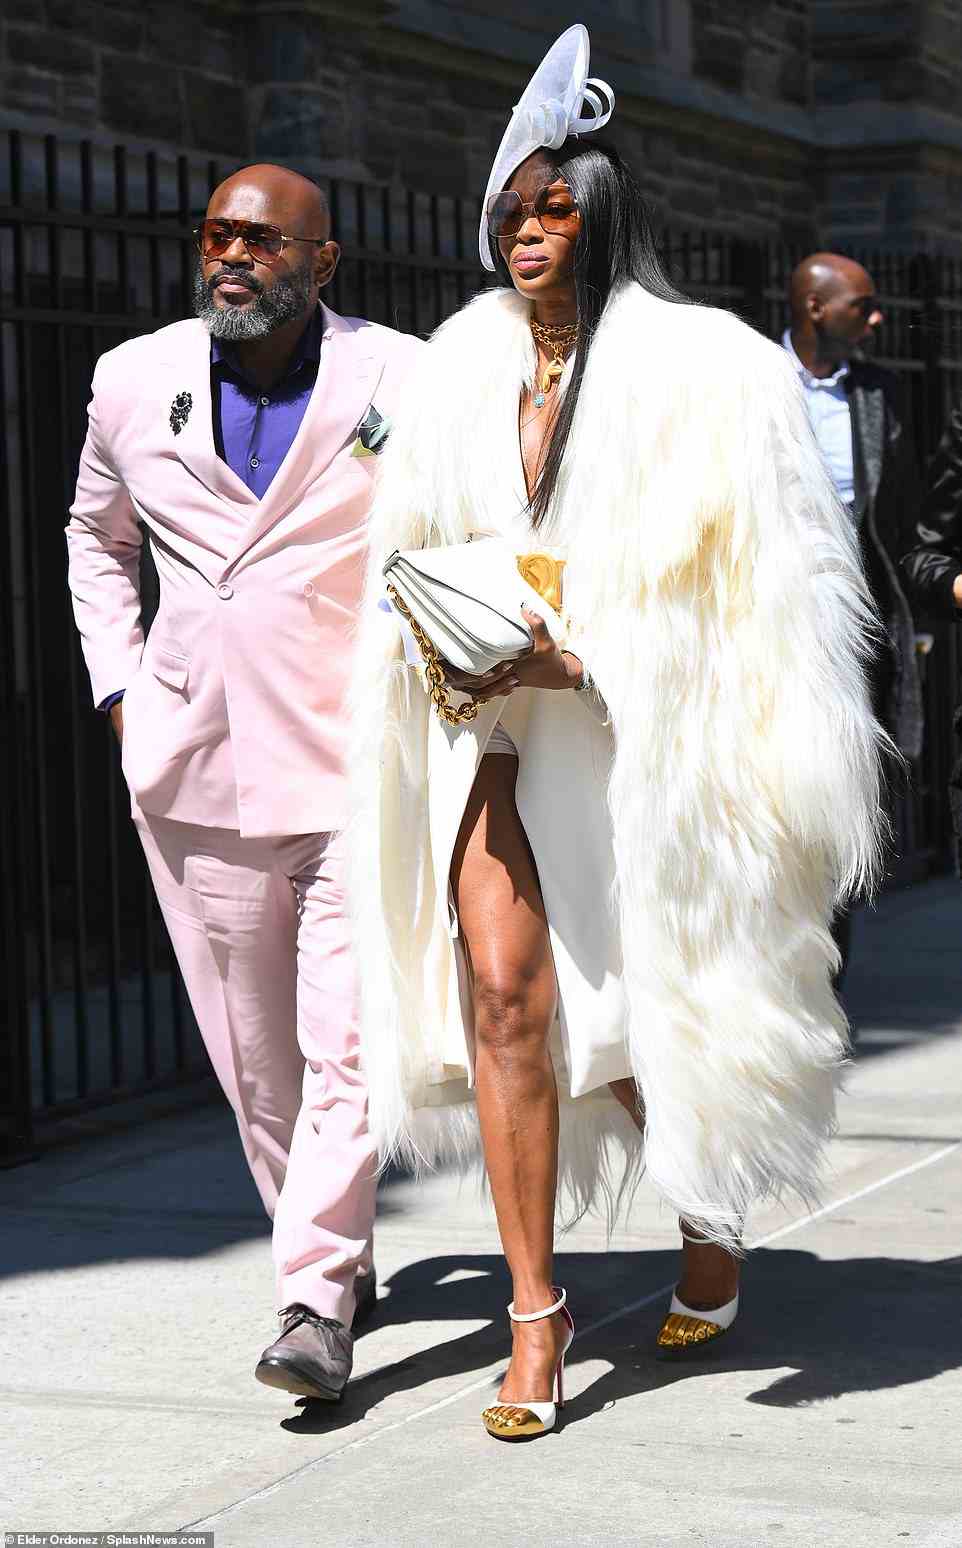 A host of stars came together to pay tribute to the late style icon Andre Leon Talley in New York on Friday, including Naomi Campbell, who wore an incredibly flashy outfit comprised of an enormous, white fur coat, which left her long legs on full display, and a jutting head piece which would ensure all eyes were on her